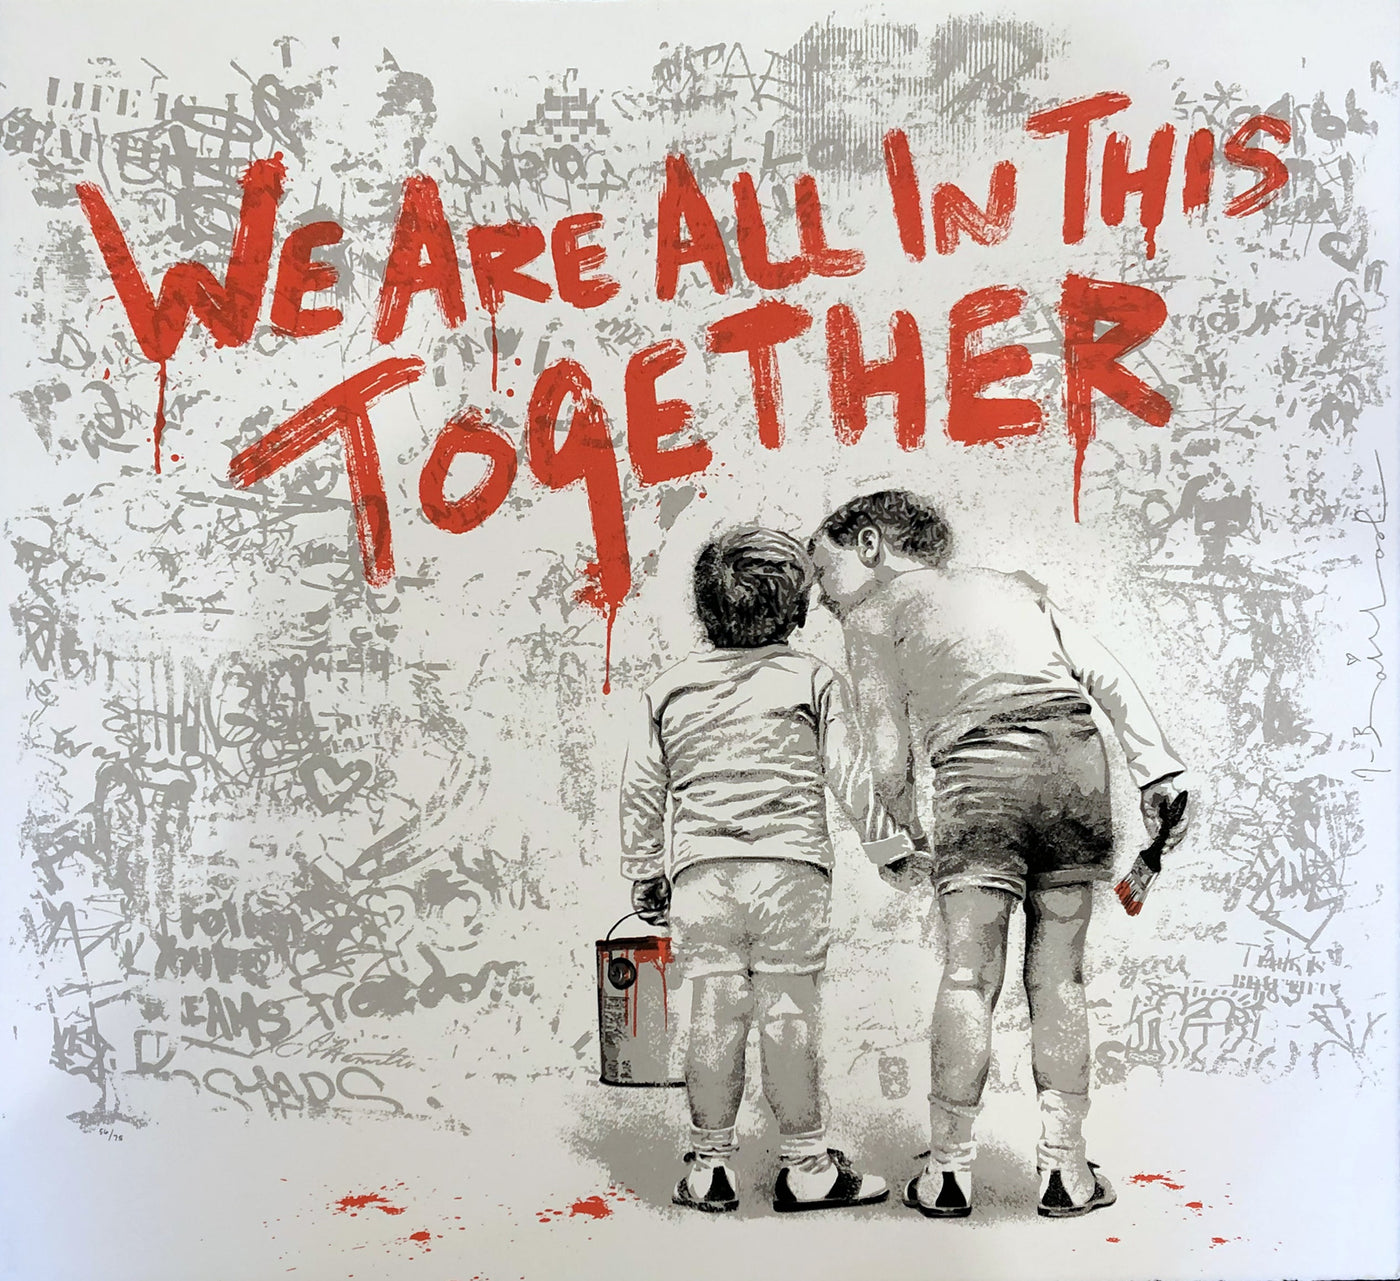 Mr. Brainwash We Are All In This Together (Red) 2020